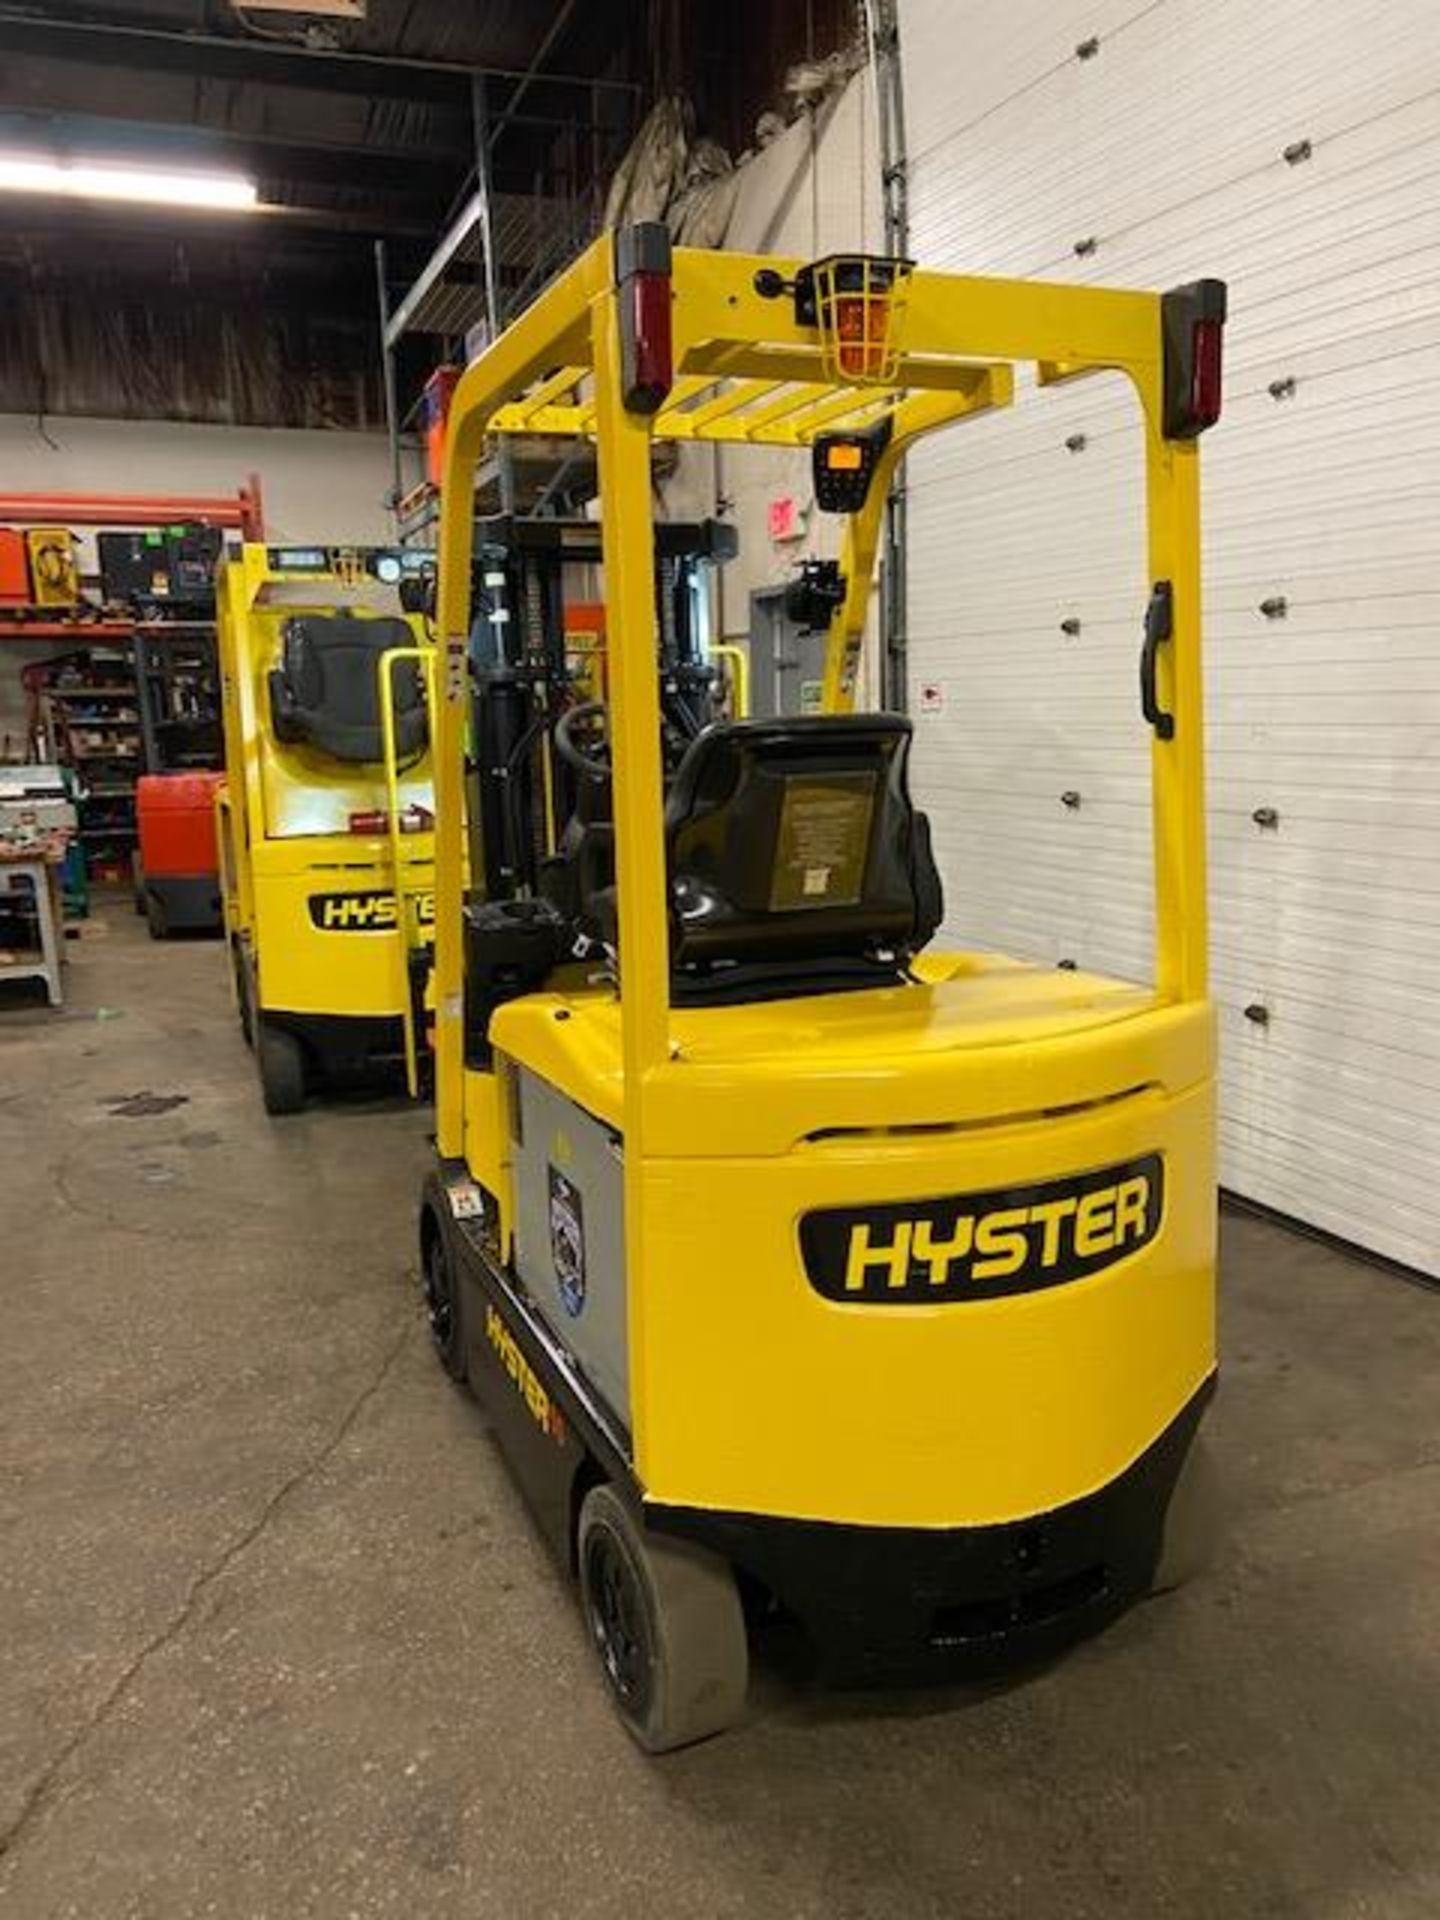 FREE CUSTOMS - 2012 Hyster 5000lbs Capacity Forklift Electric with 3-STAGE MAST sideshift MINT - Image 3 of 3